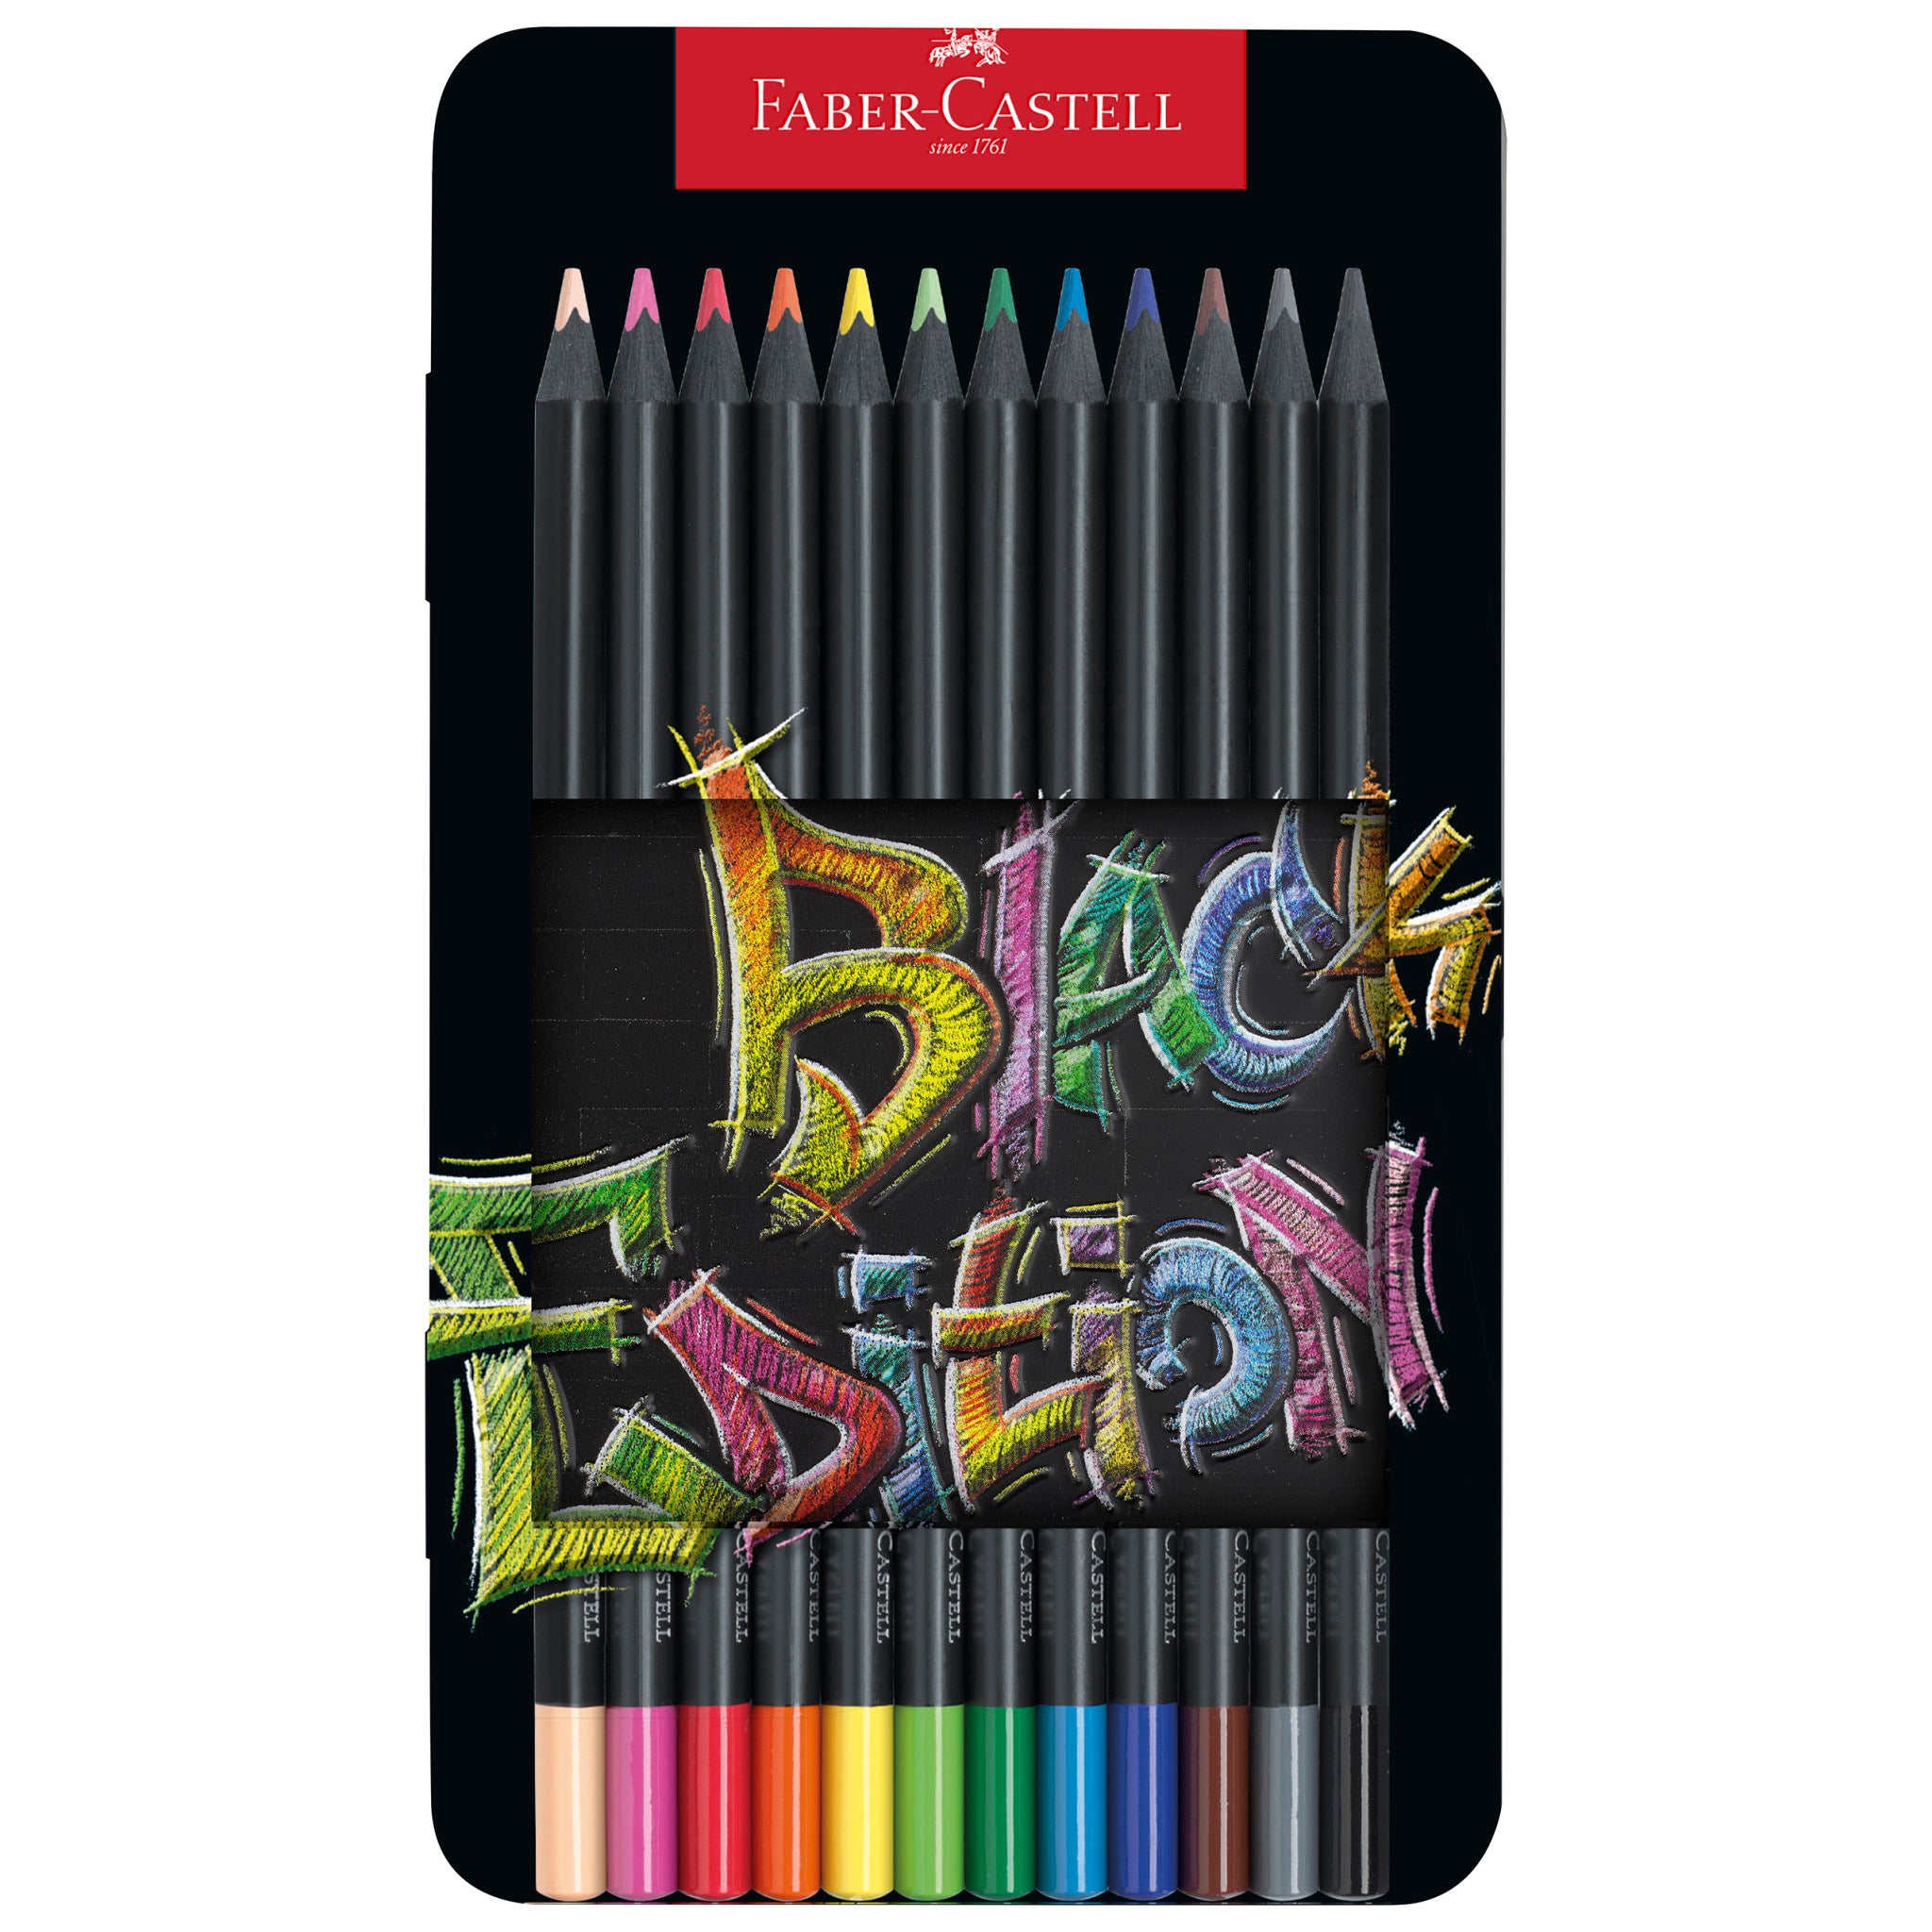 Black Edition Colored Pencils, Tin of 12 - #116413